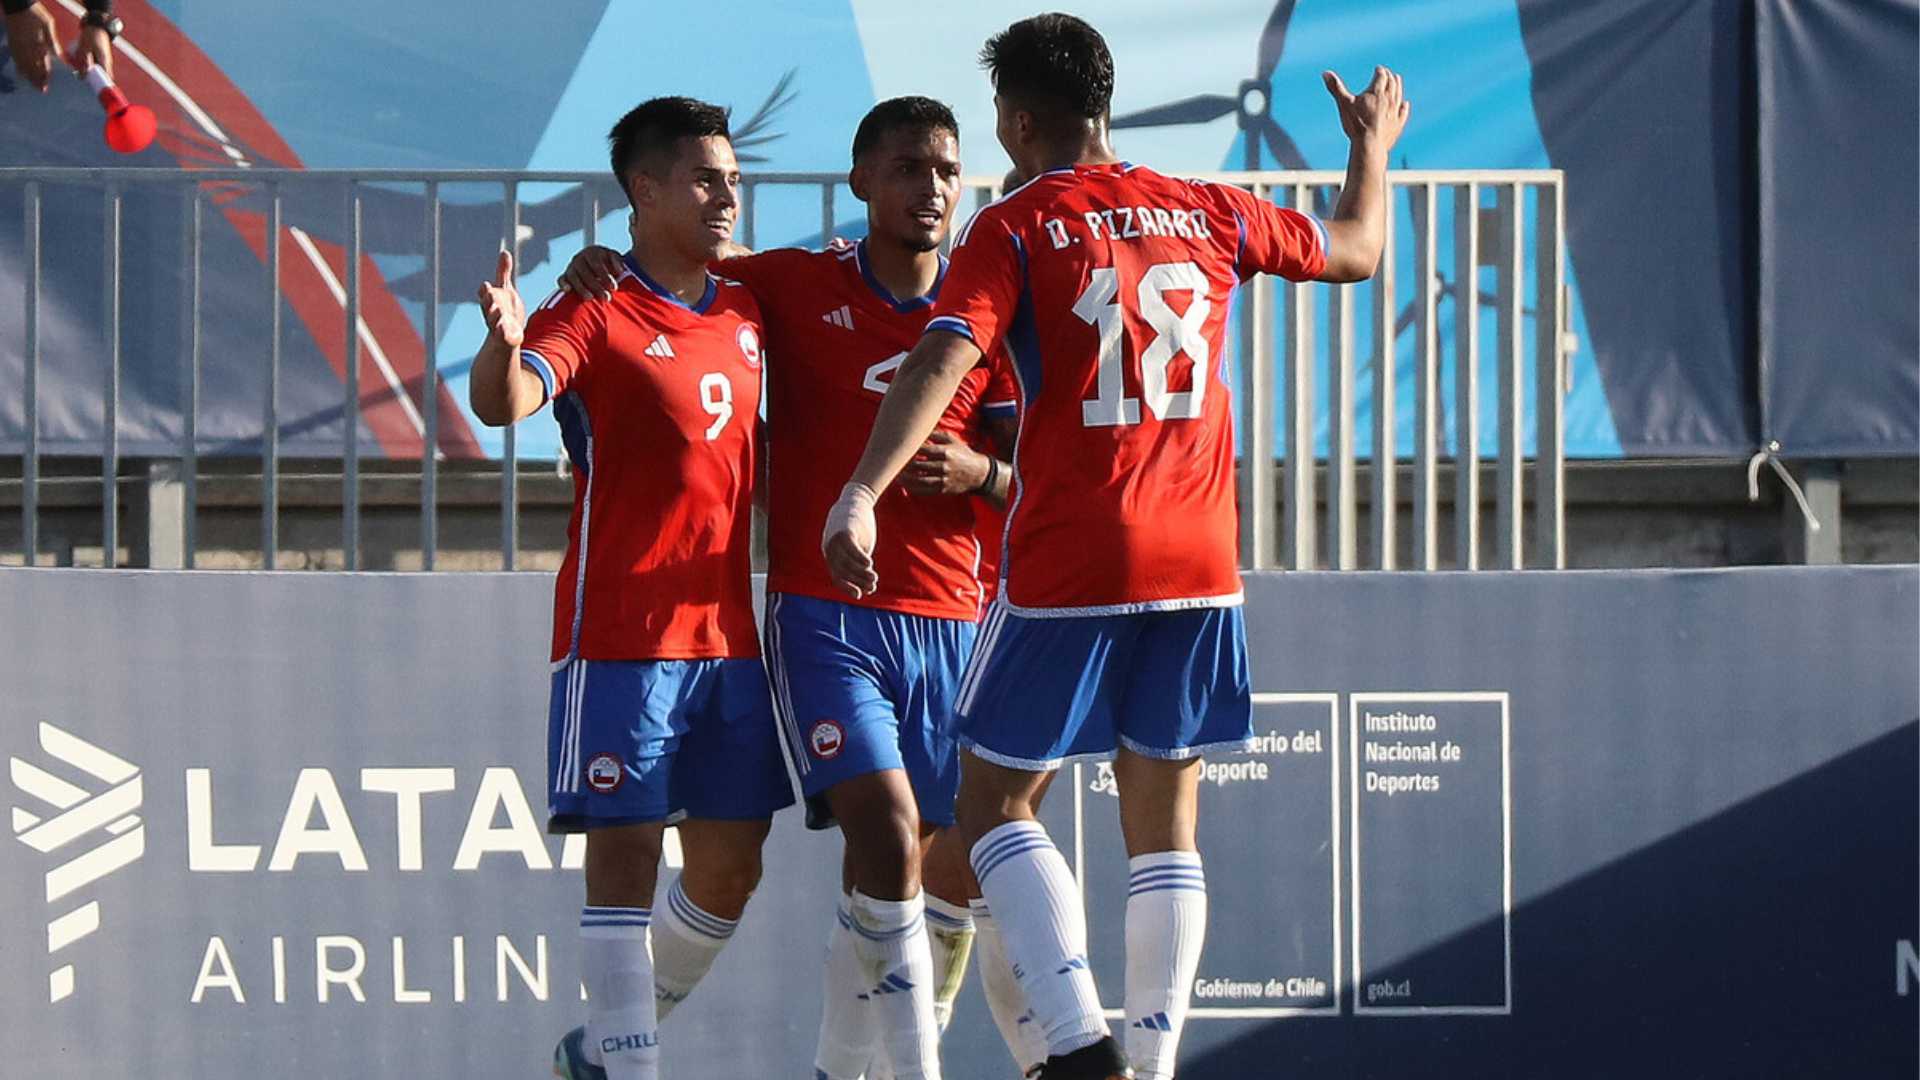 Chile advances to male football’s semifinals after defeating Uruguay